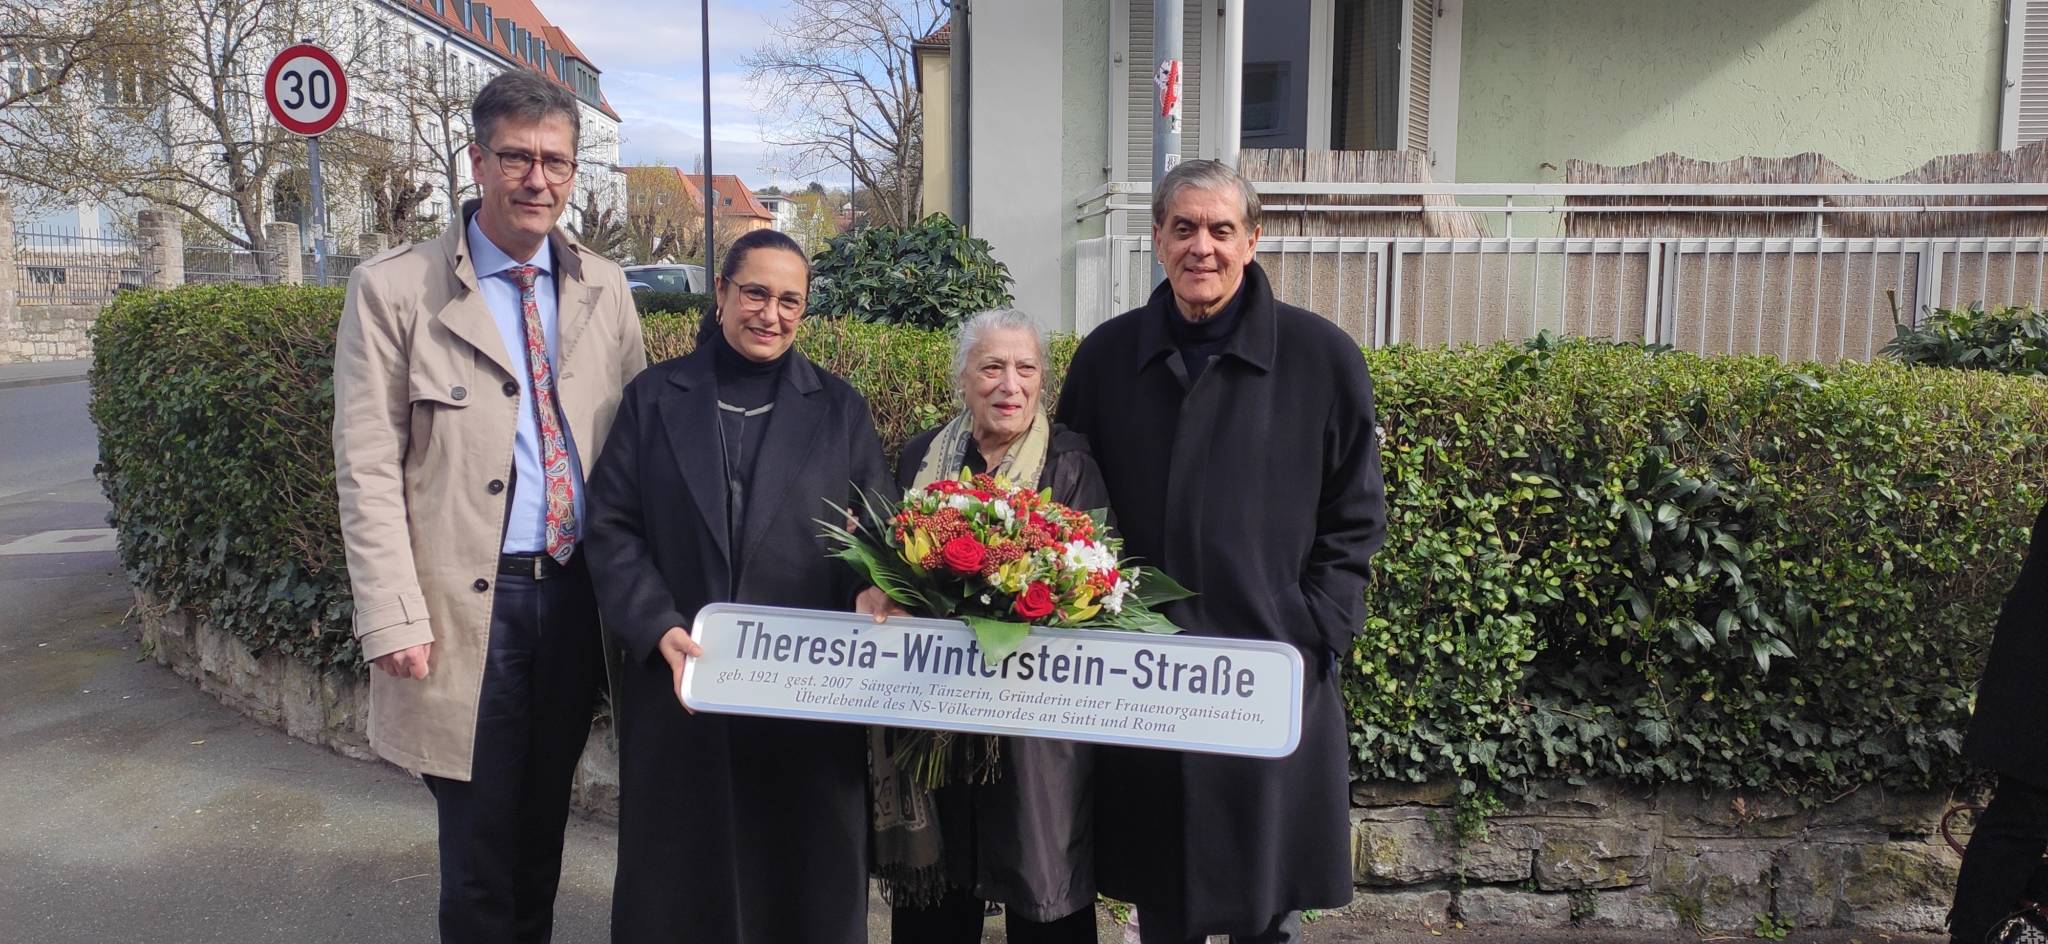 Four persons beneath the newly unveiled street sign.